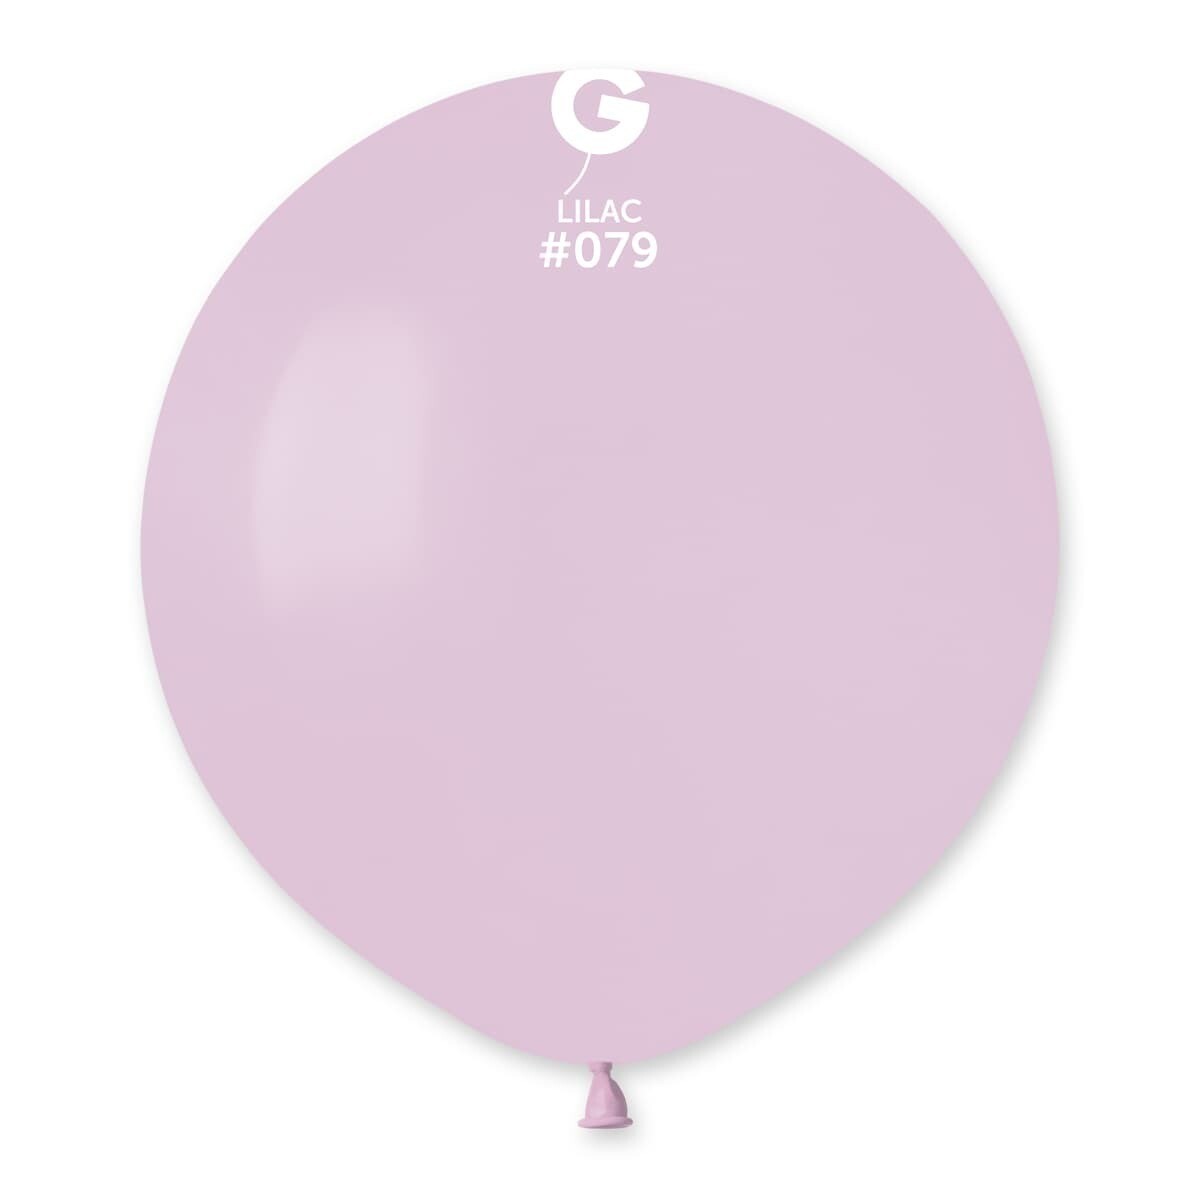 G150: #079 Lilac 157956 Standard Color 19 in